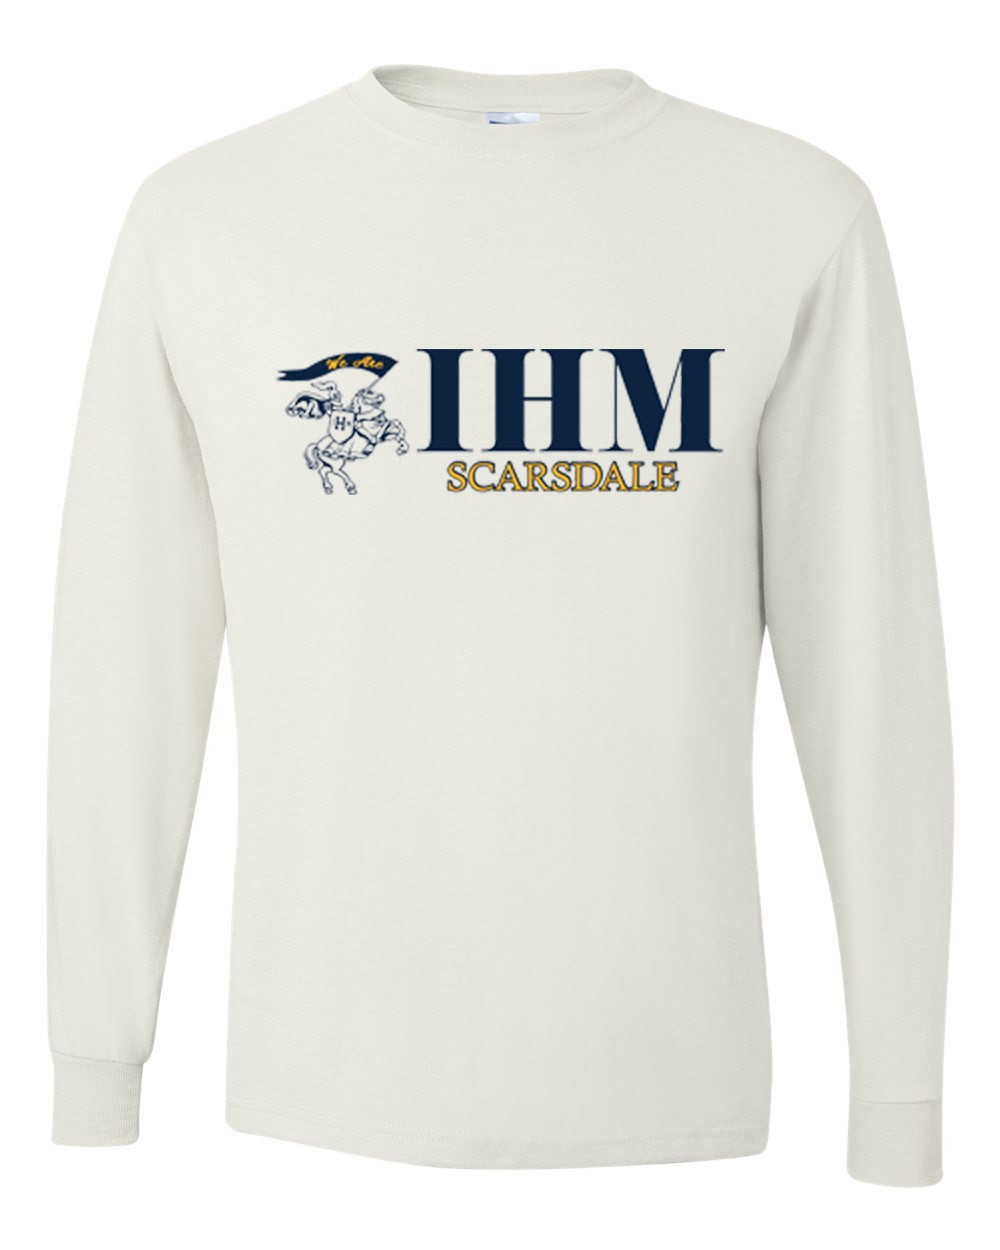 IHM Spirit L/S T-Shirt w/ Navy Knight Logo - Please Allow 2-3 Weeks for Delivery